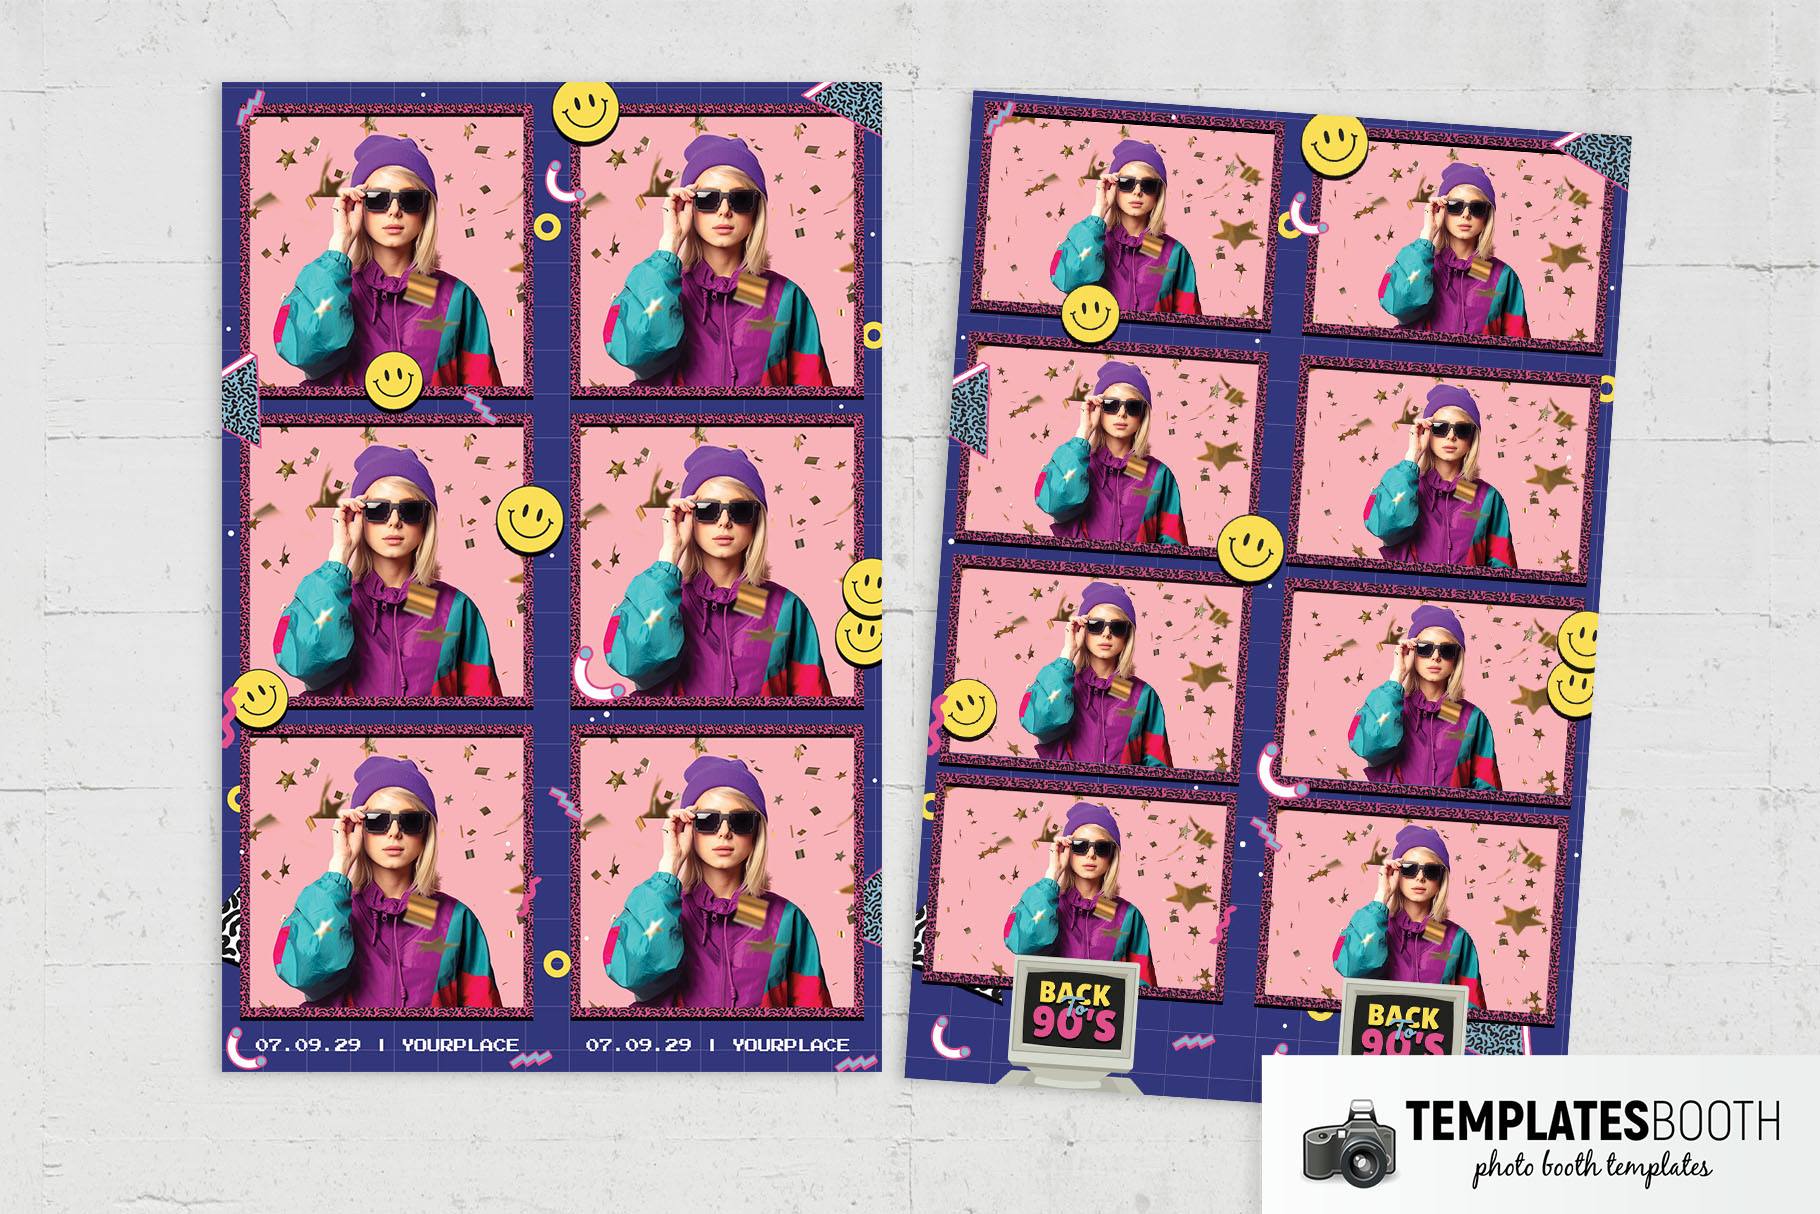 90s Night Photo Booth Template